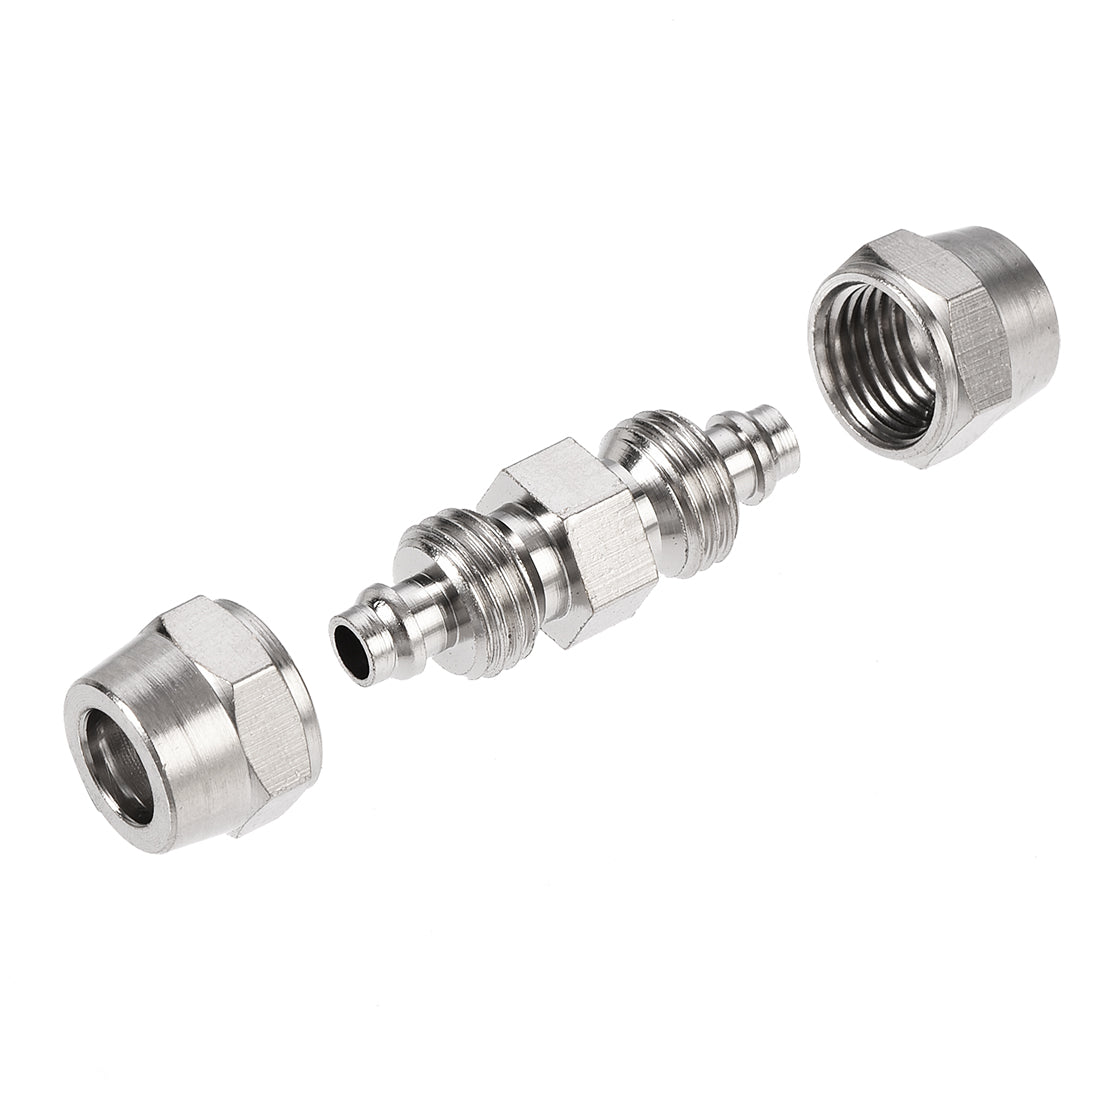 uxcell Uxcell Compression Tube Fitting Nickel Plating for 6mm Pneumatic Hose Tube 2pcs